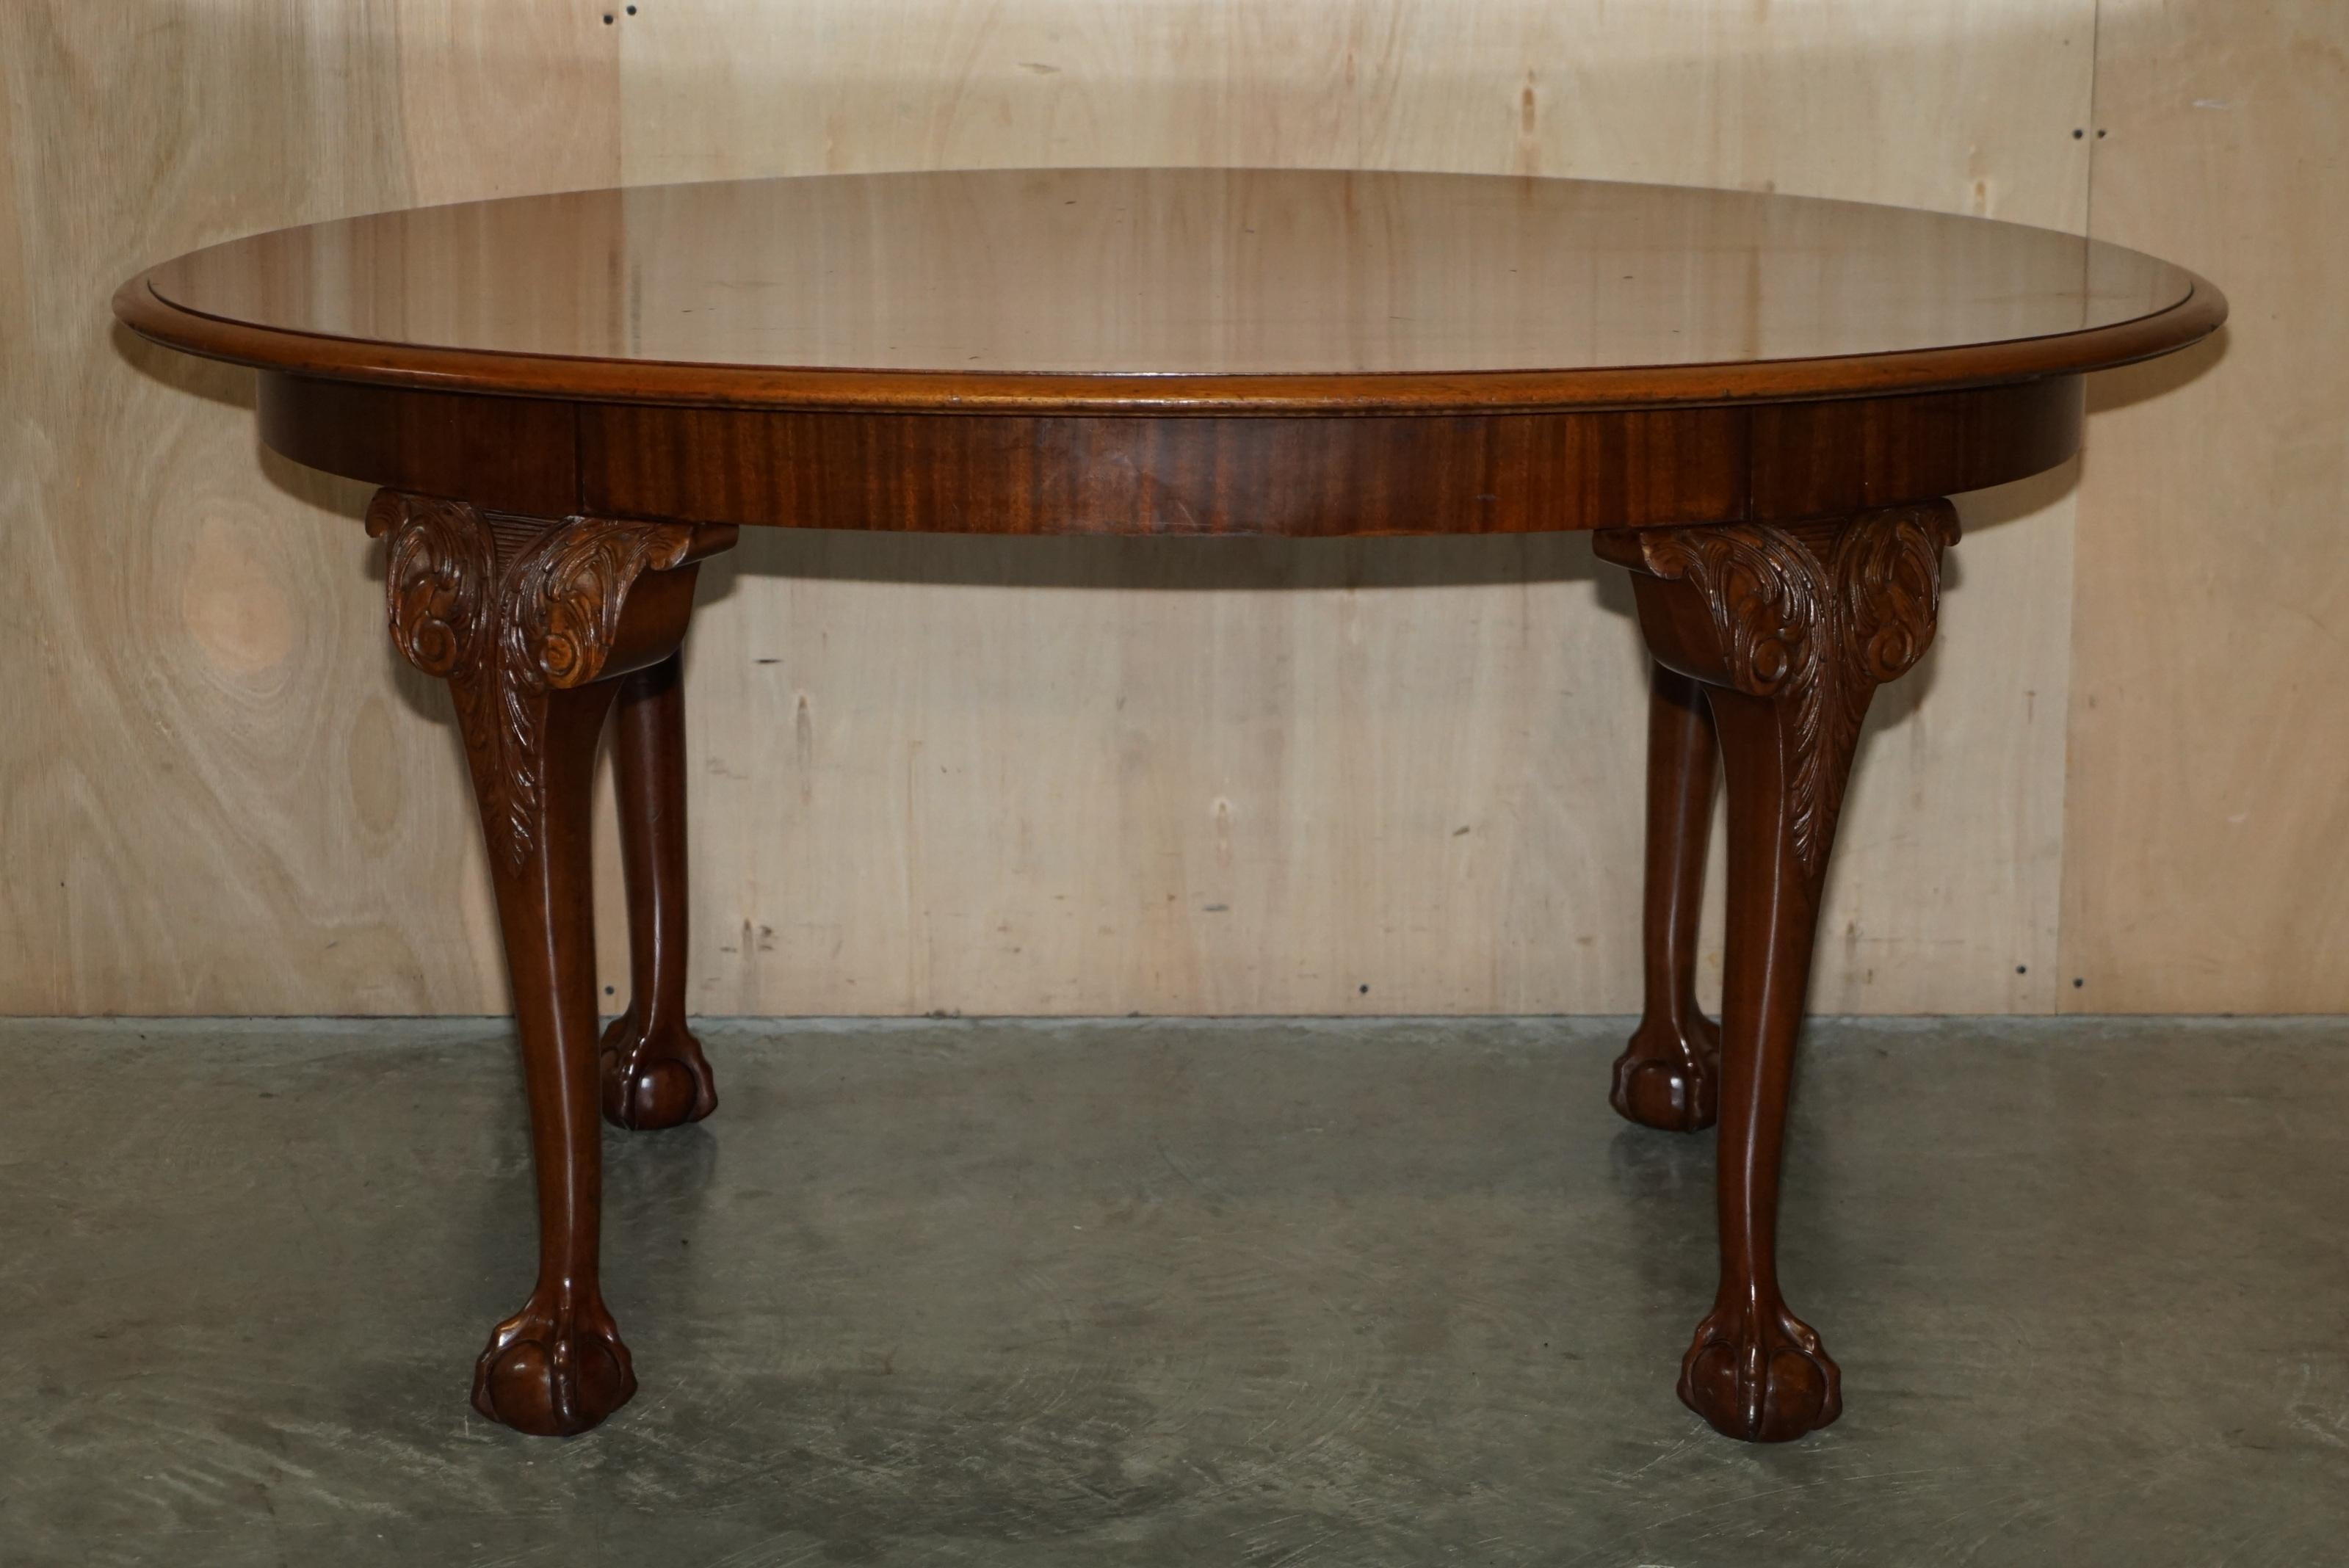 We are delighted to offer for sale this lovely antique circa 1920's English Walnut hand carved Claw & Ball foot dining table 

A very well made and decorative table, the long elegant cabriolet legs are ornately carved to the top in the Georgian